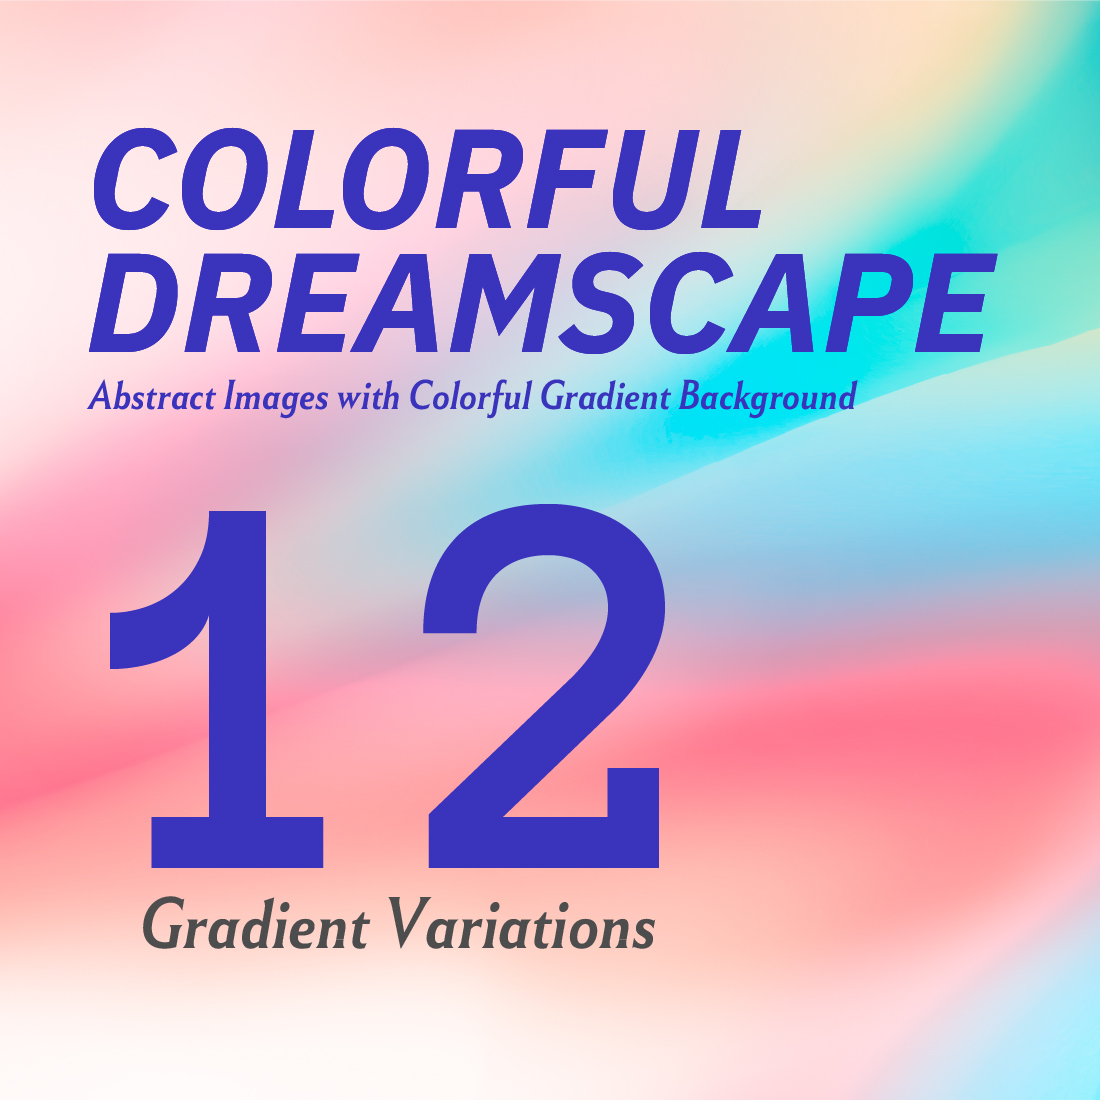 Colorful Dreamscape - abstract images with colorful gradient backgrounds cover image.